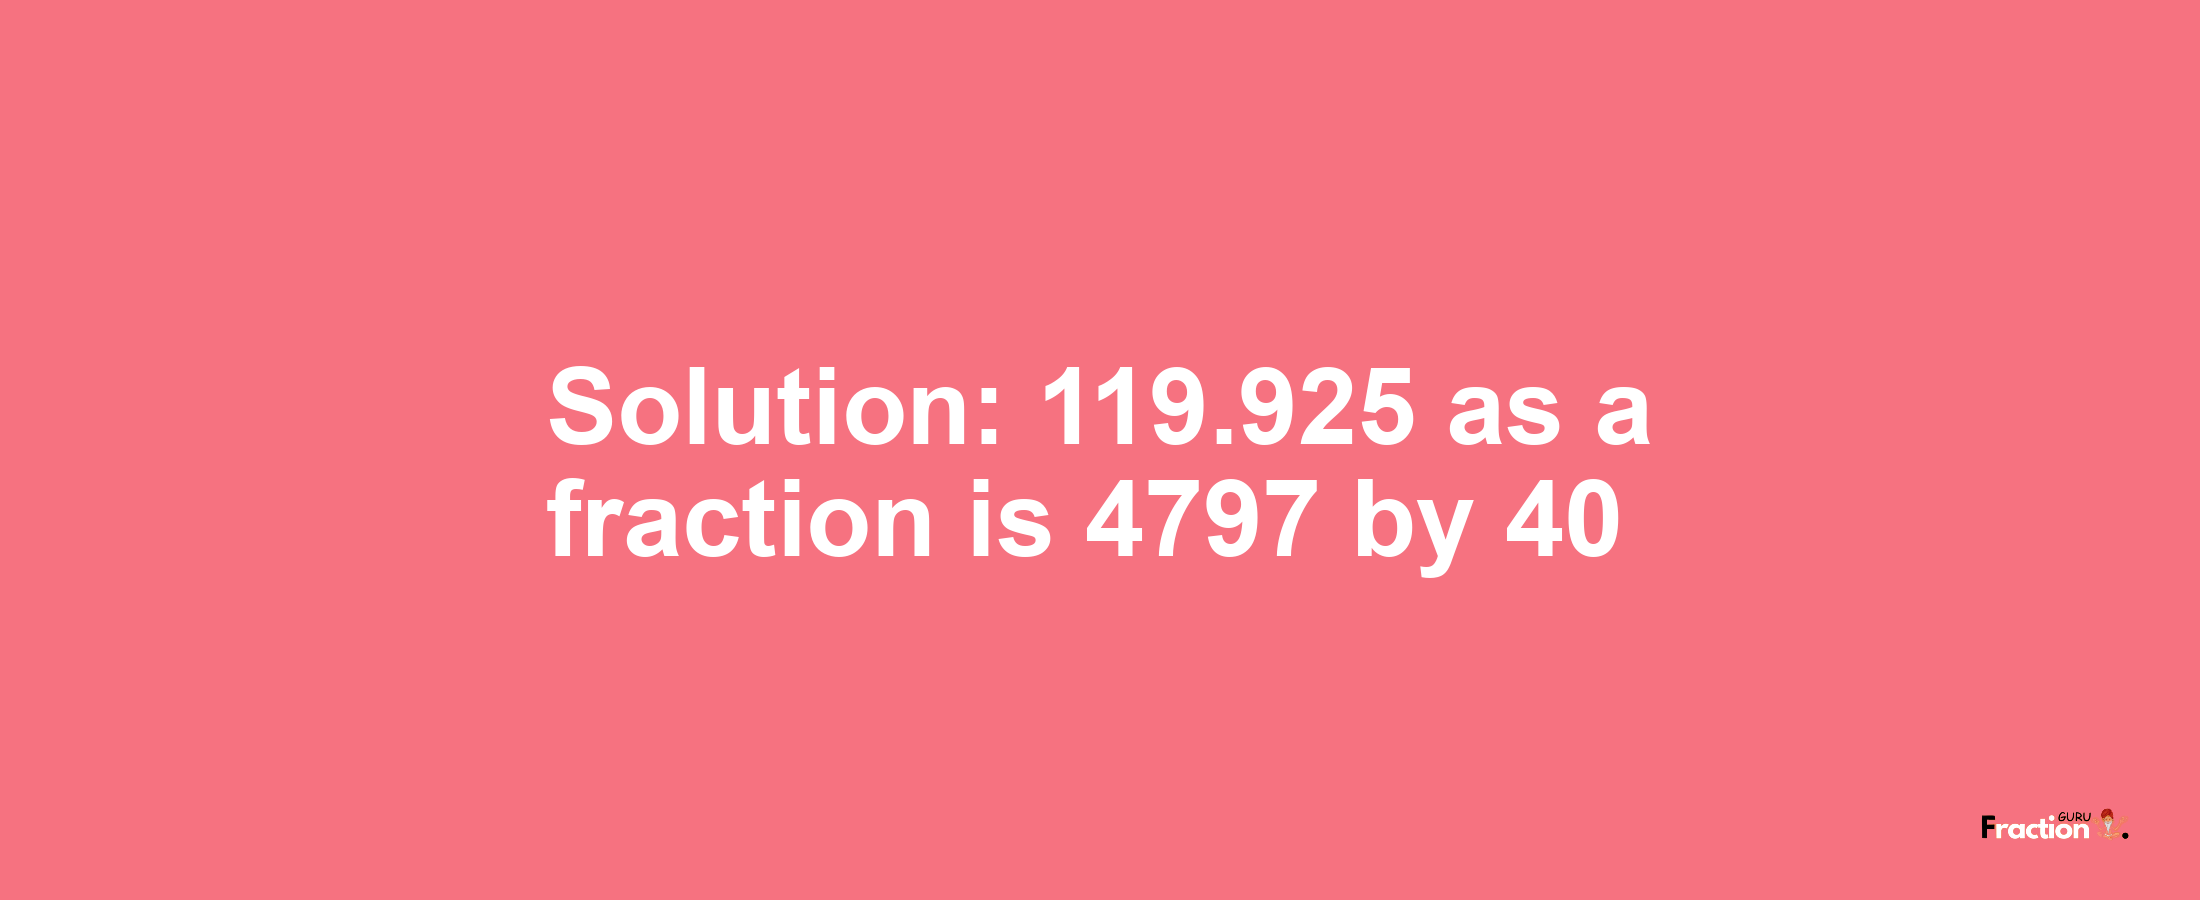 Solution:119.925 as a fraction is 4797/40